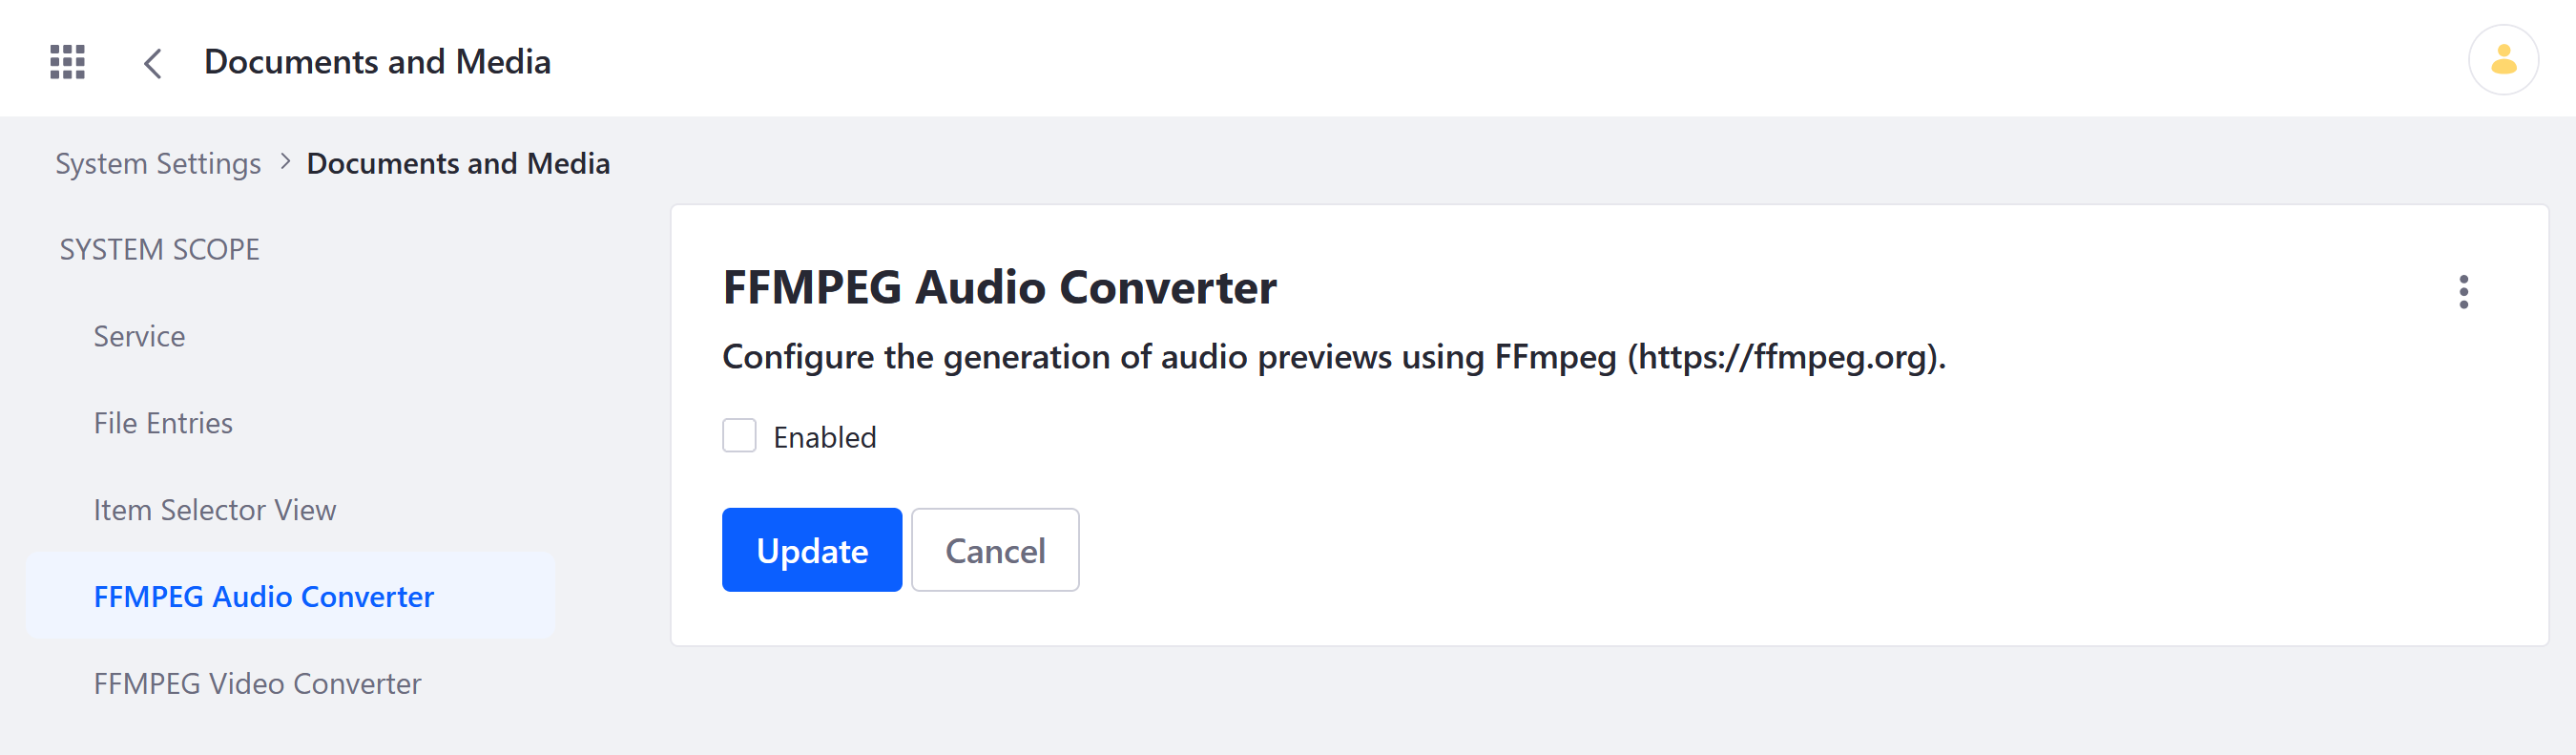 Enable both FFMPEG Audio Converter and FFMPEG Video Converter.